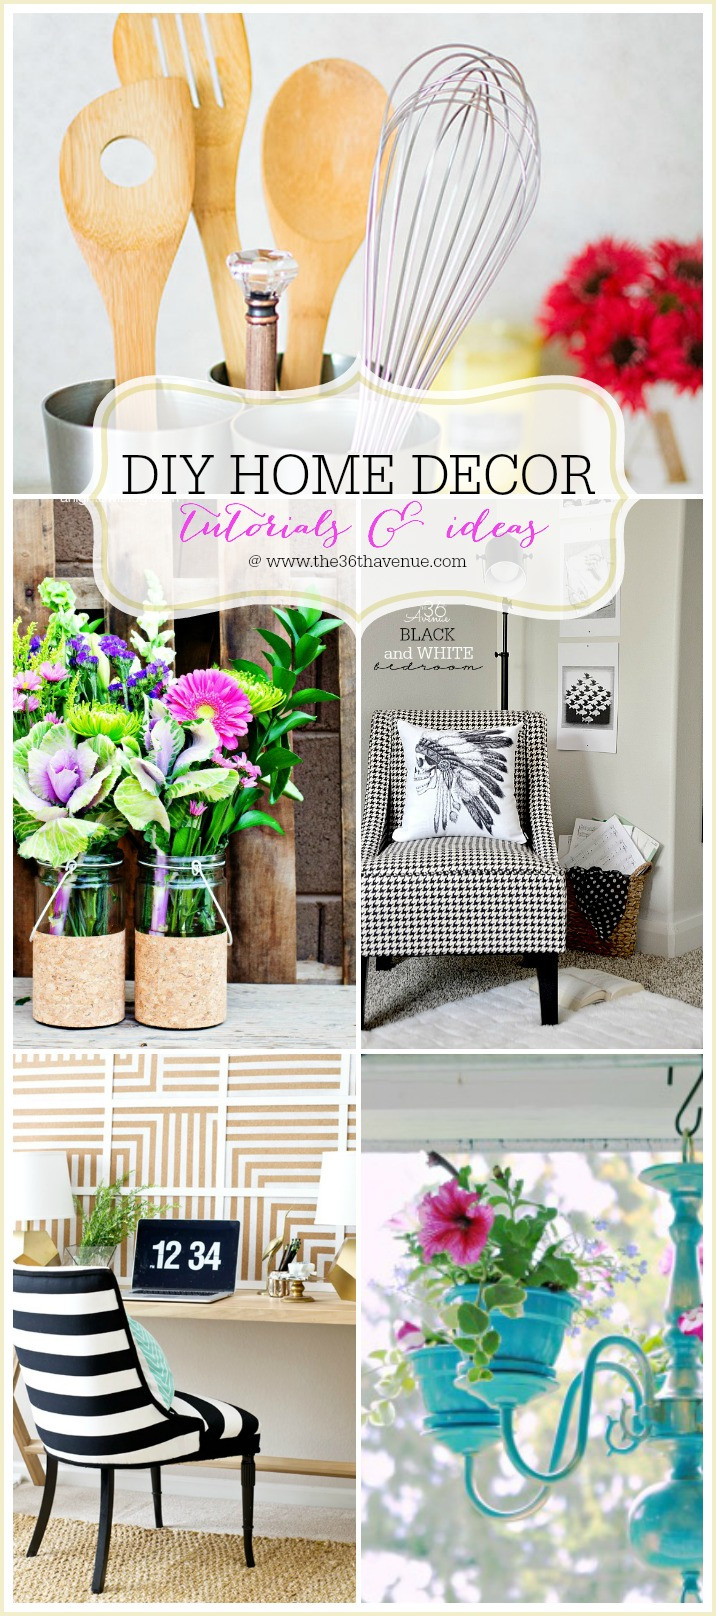 Home DIY Projects
 The 36th AVENUE Home Decor DIY Projects